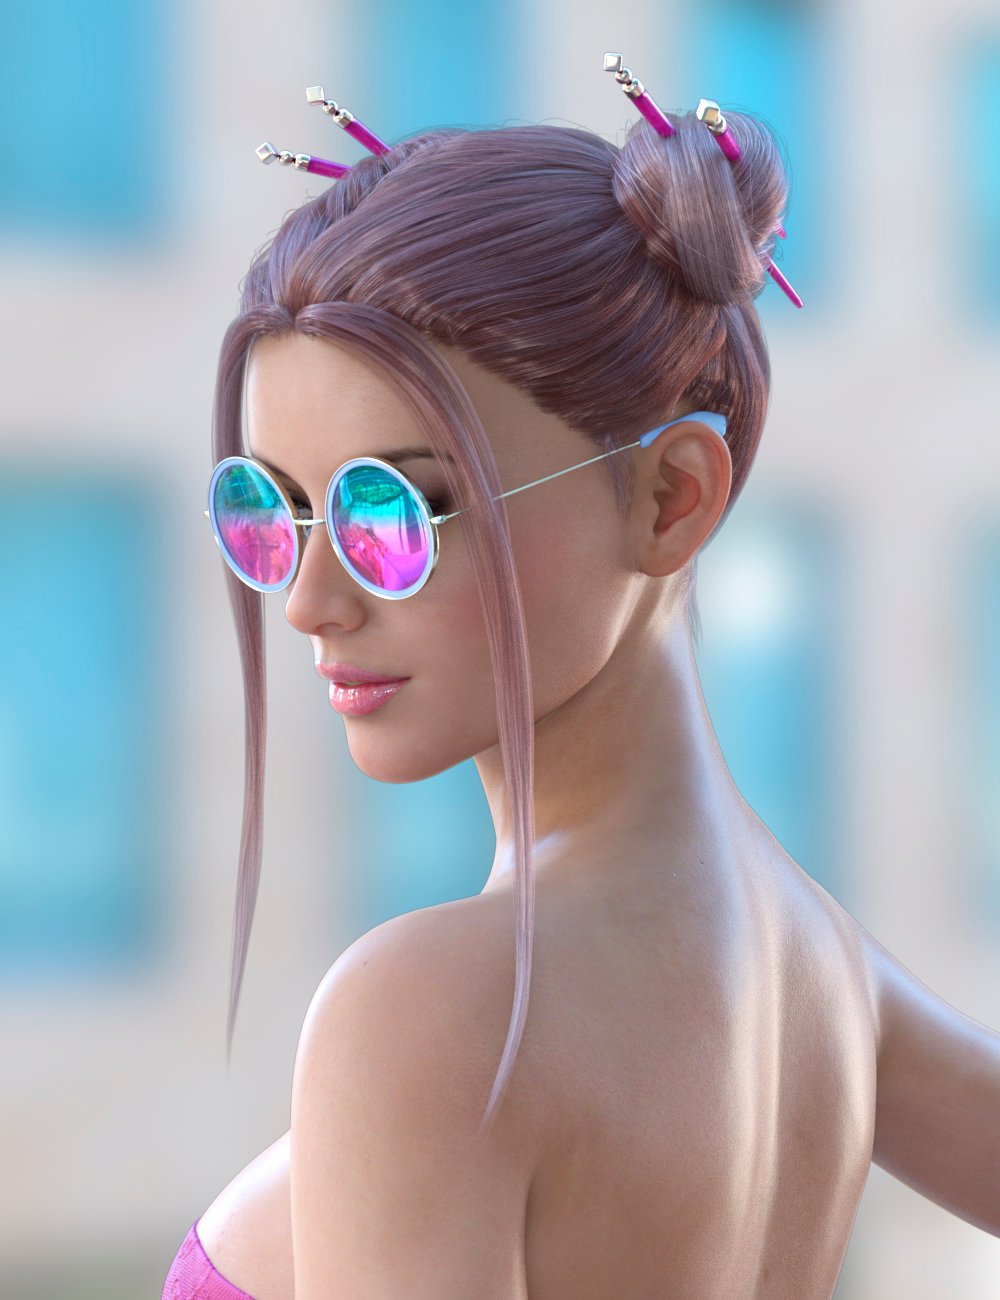 Double Buns Hairstyle for Genesis 8.1 Females by: Blue Rabbit, 3D Models by Daz 3D